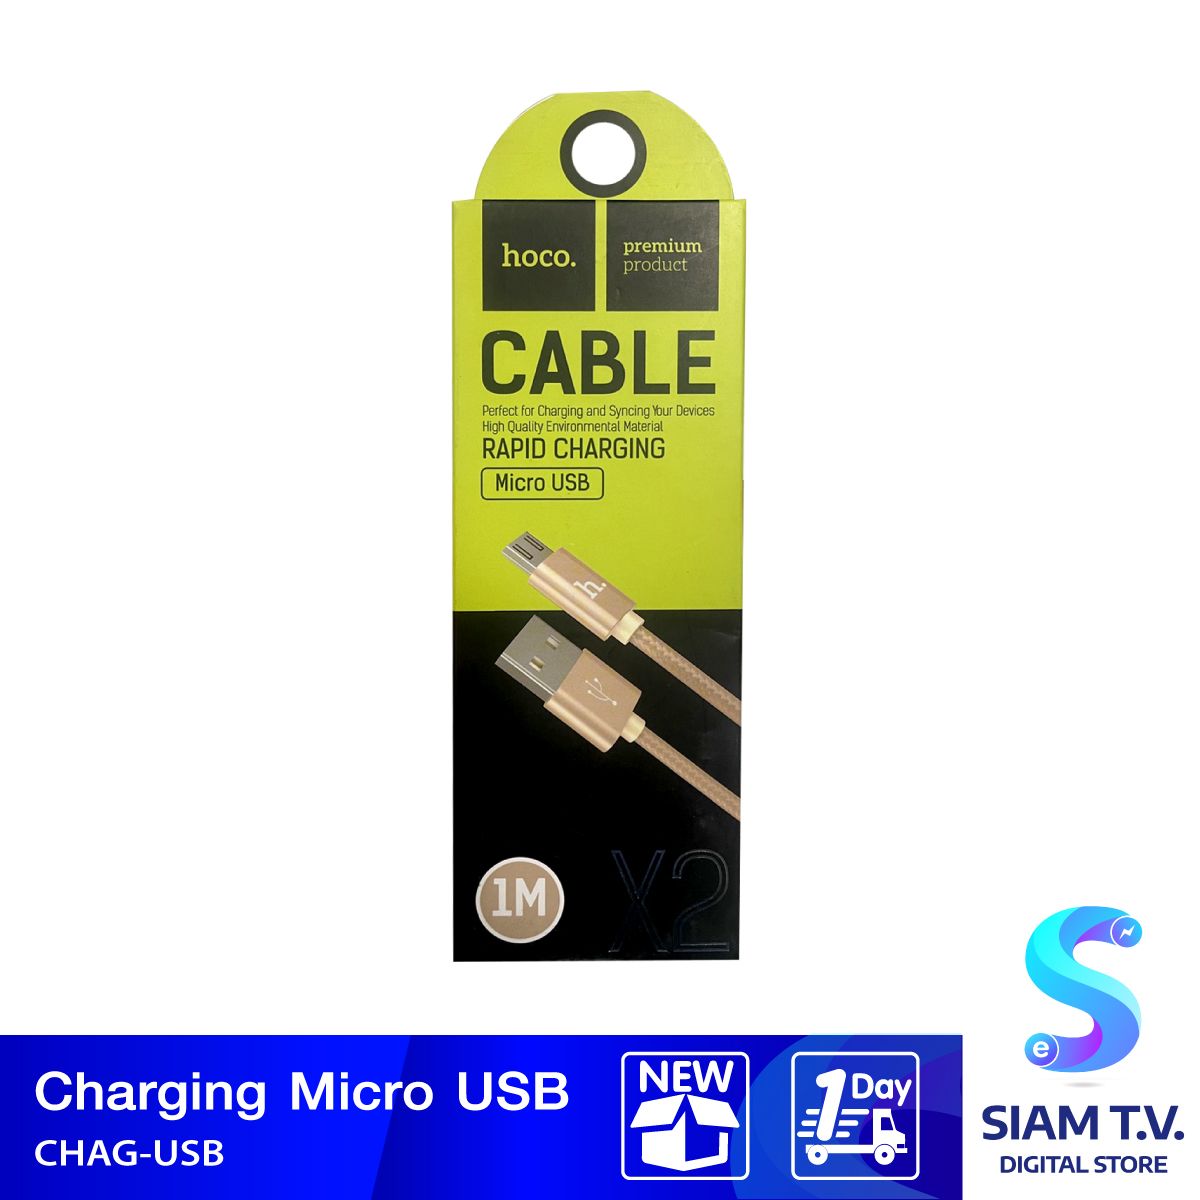 Ais CHARGING MICRO USB CABLE